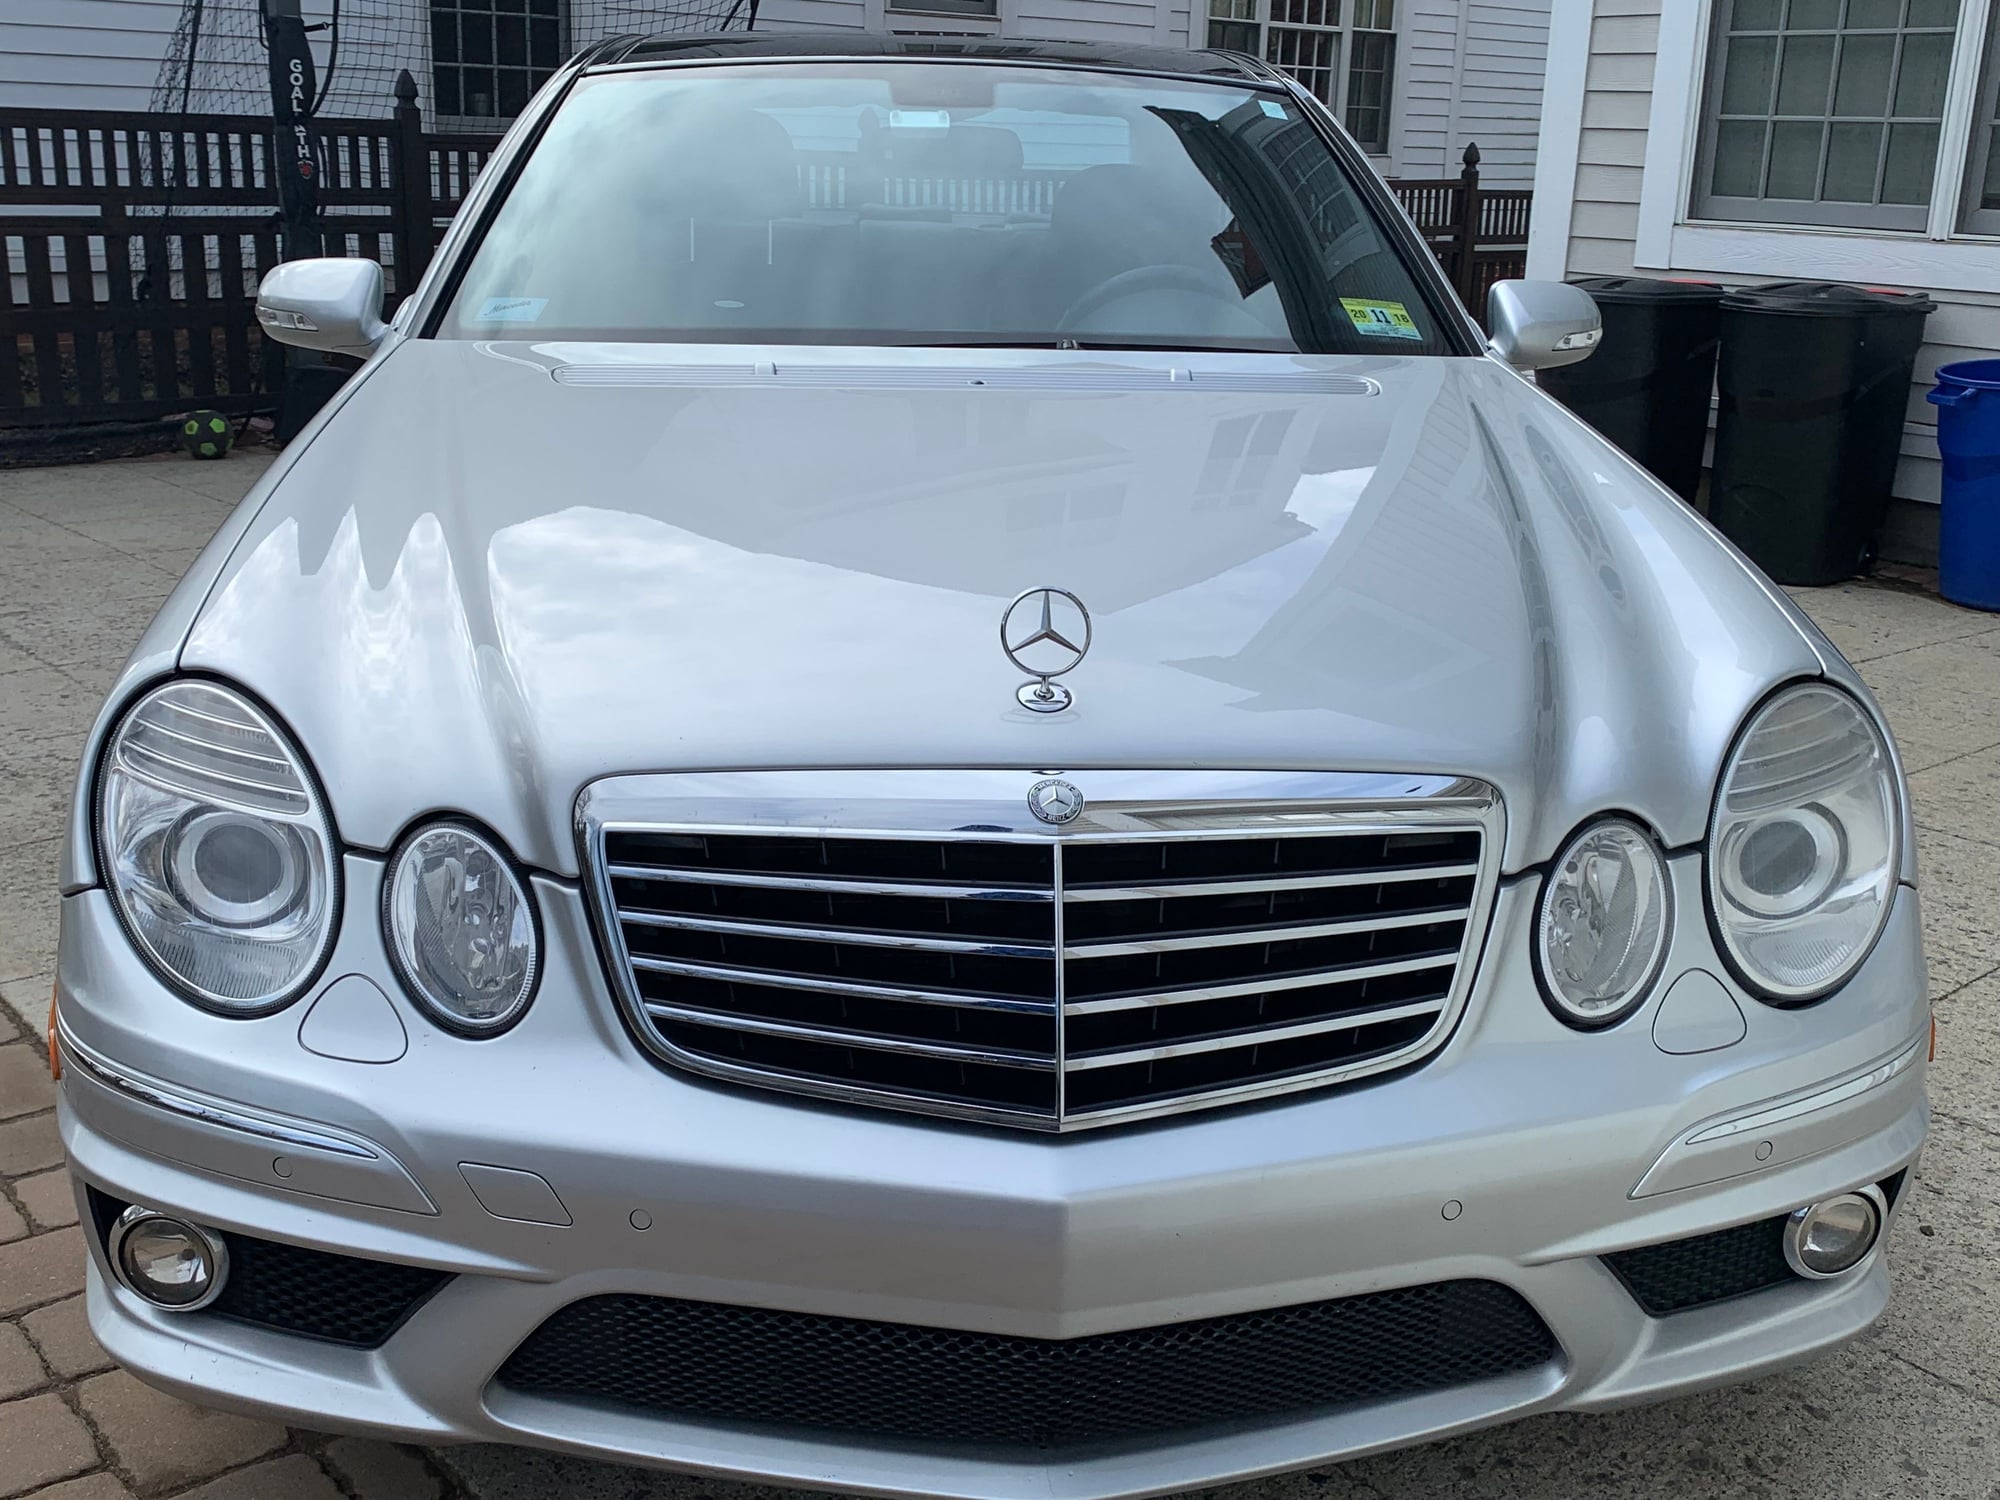 2009 Mercedes-Benz E63 AMG - 2009 AMG e63: Last/Best Year for 6.3L Motor - Used - VIN WDUF77x69b363513 - 72,000 Miles - 8 cyl - 2WD - Automatic - Sedan - Silver - Livingston, NJ 07039, United States